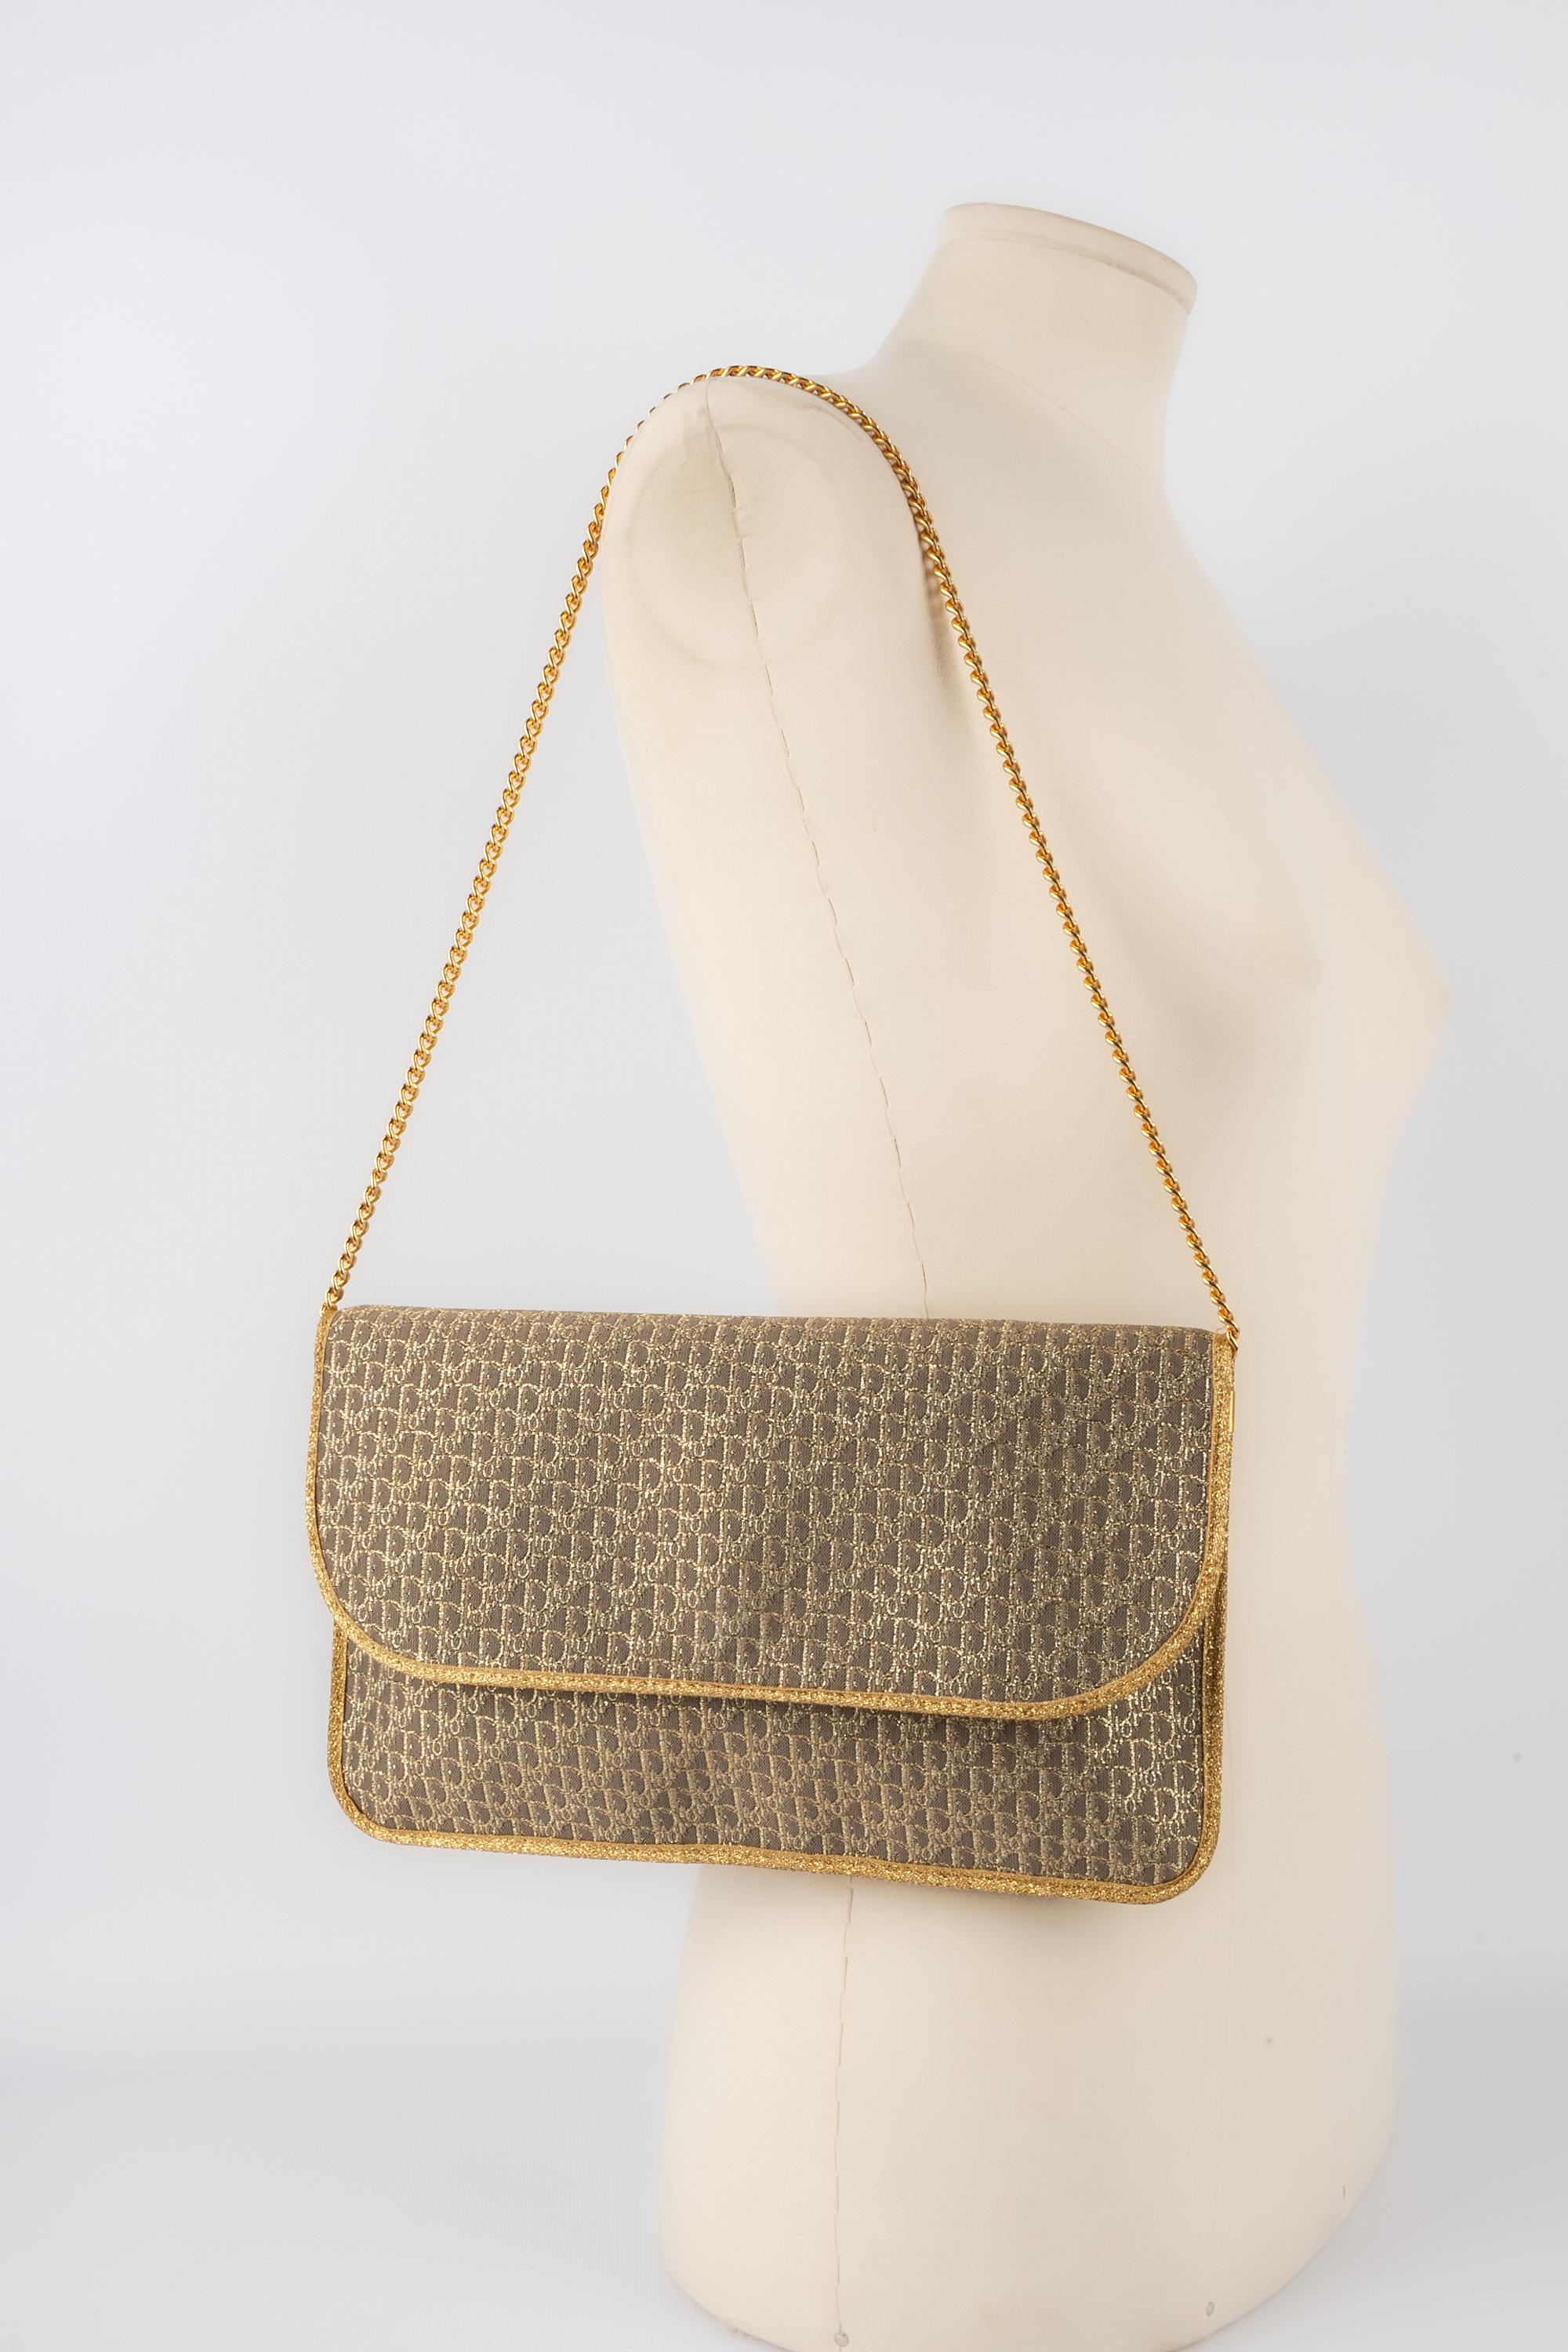 DIOR - (Made in France) Golden monogrammed canvas clutch with golden chain handle.

Condition:
Decent condition

Dimensions:
Length: 25 cm - Height: 16 cm - Depth: 1 cm - Handle length: 45 cm

S201